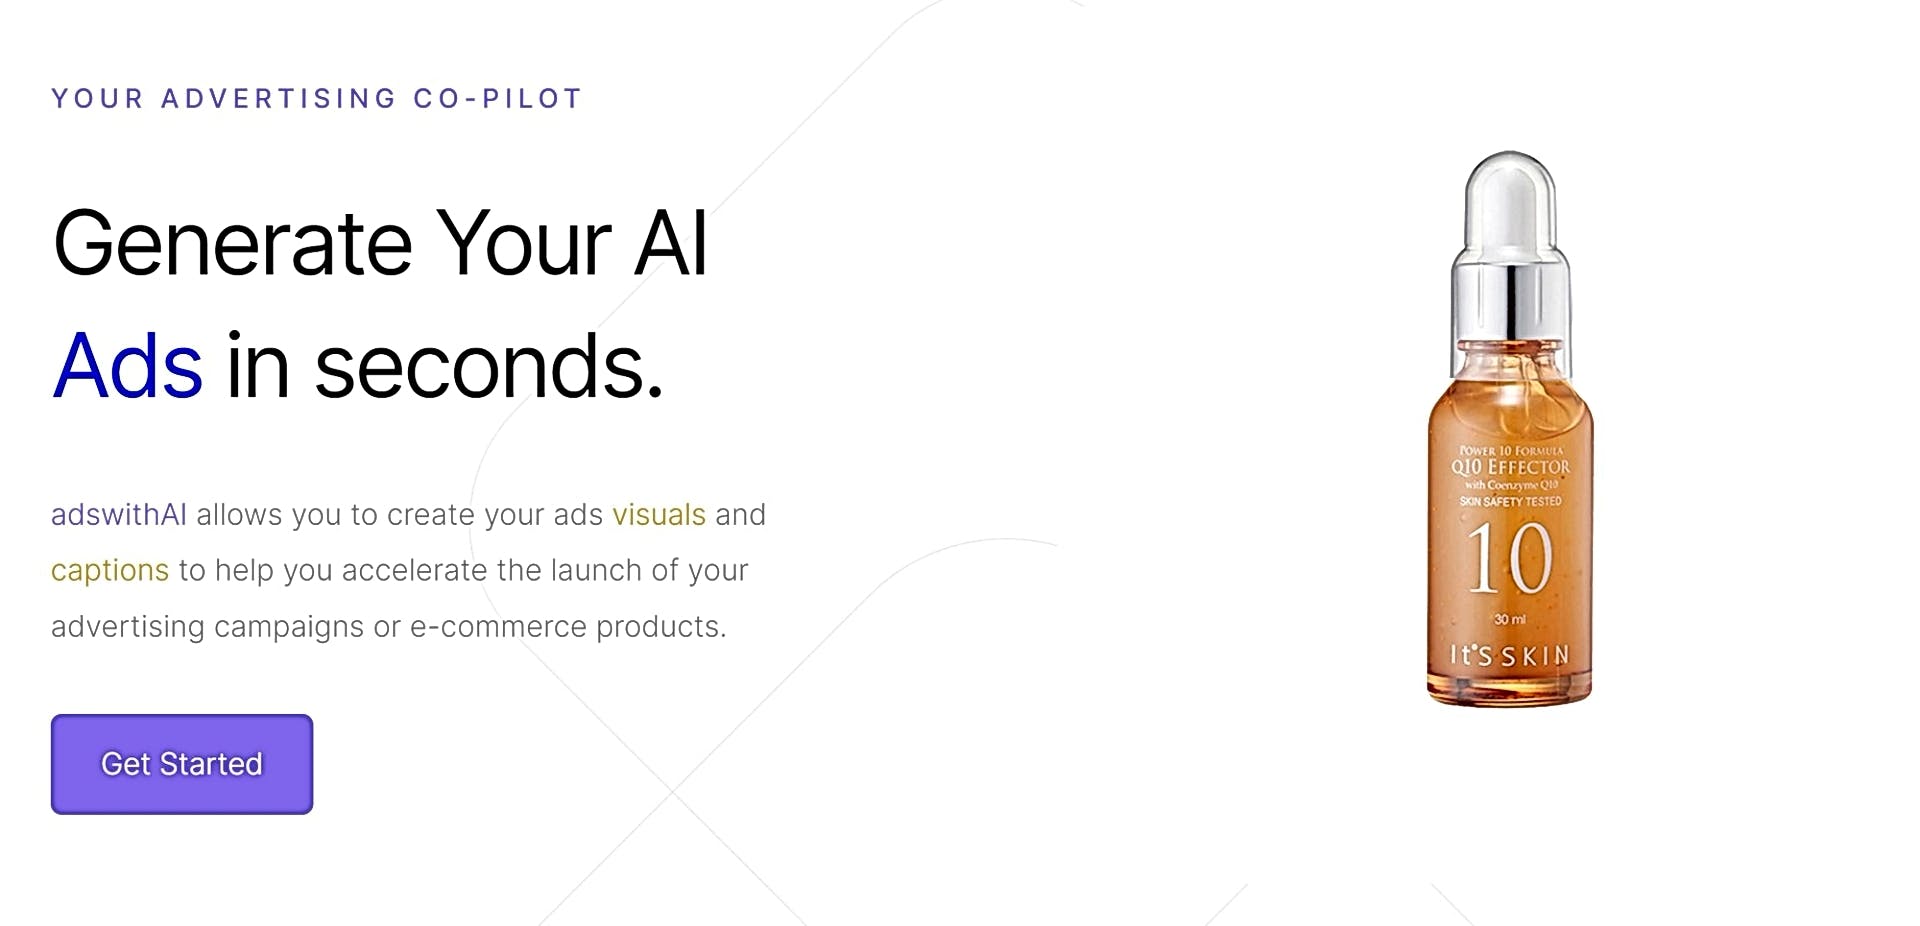 AdswithAI featured